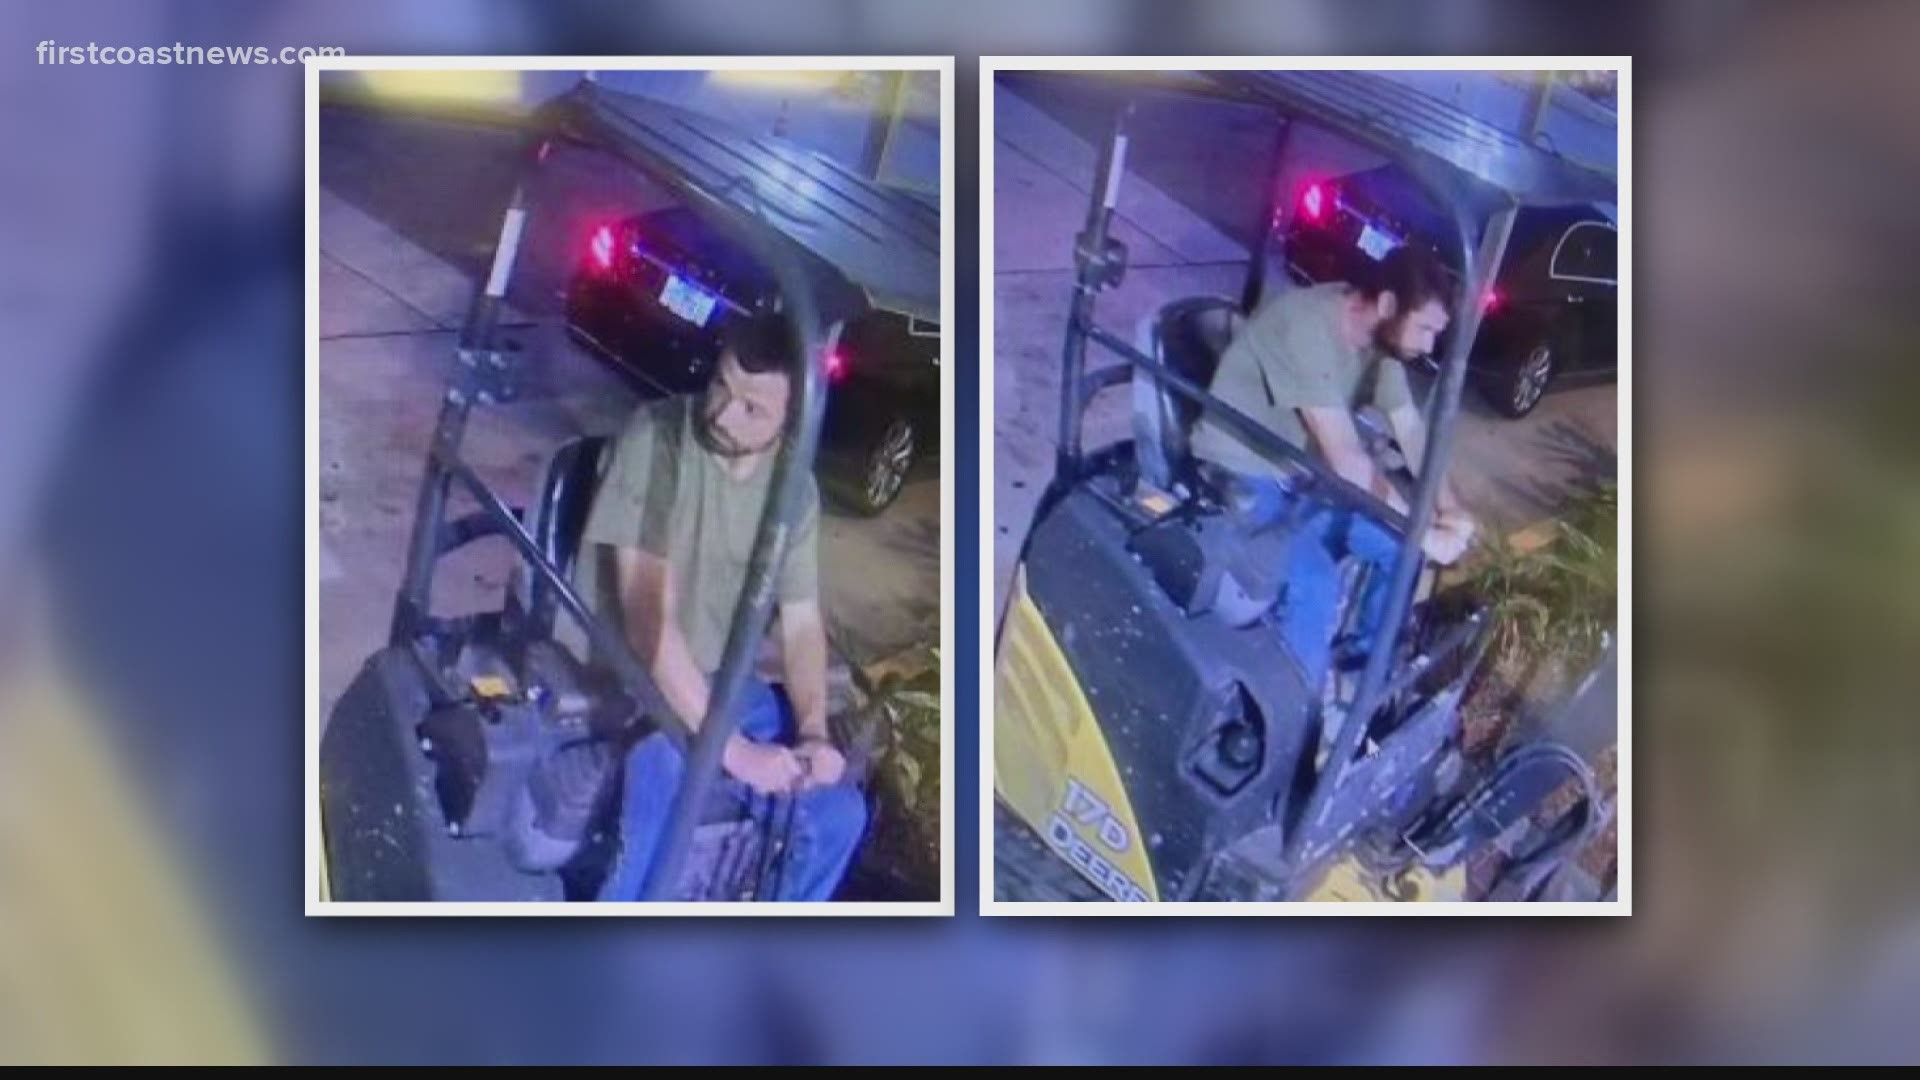 Police say the man in surveillance images stole an excavator from a nearby construction site Saturday before driving it through the Baptist Medical Center entrance.